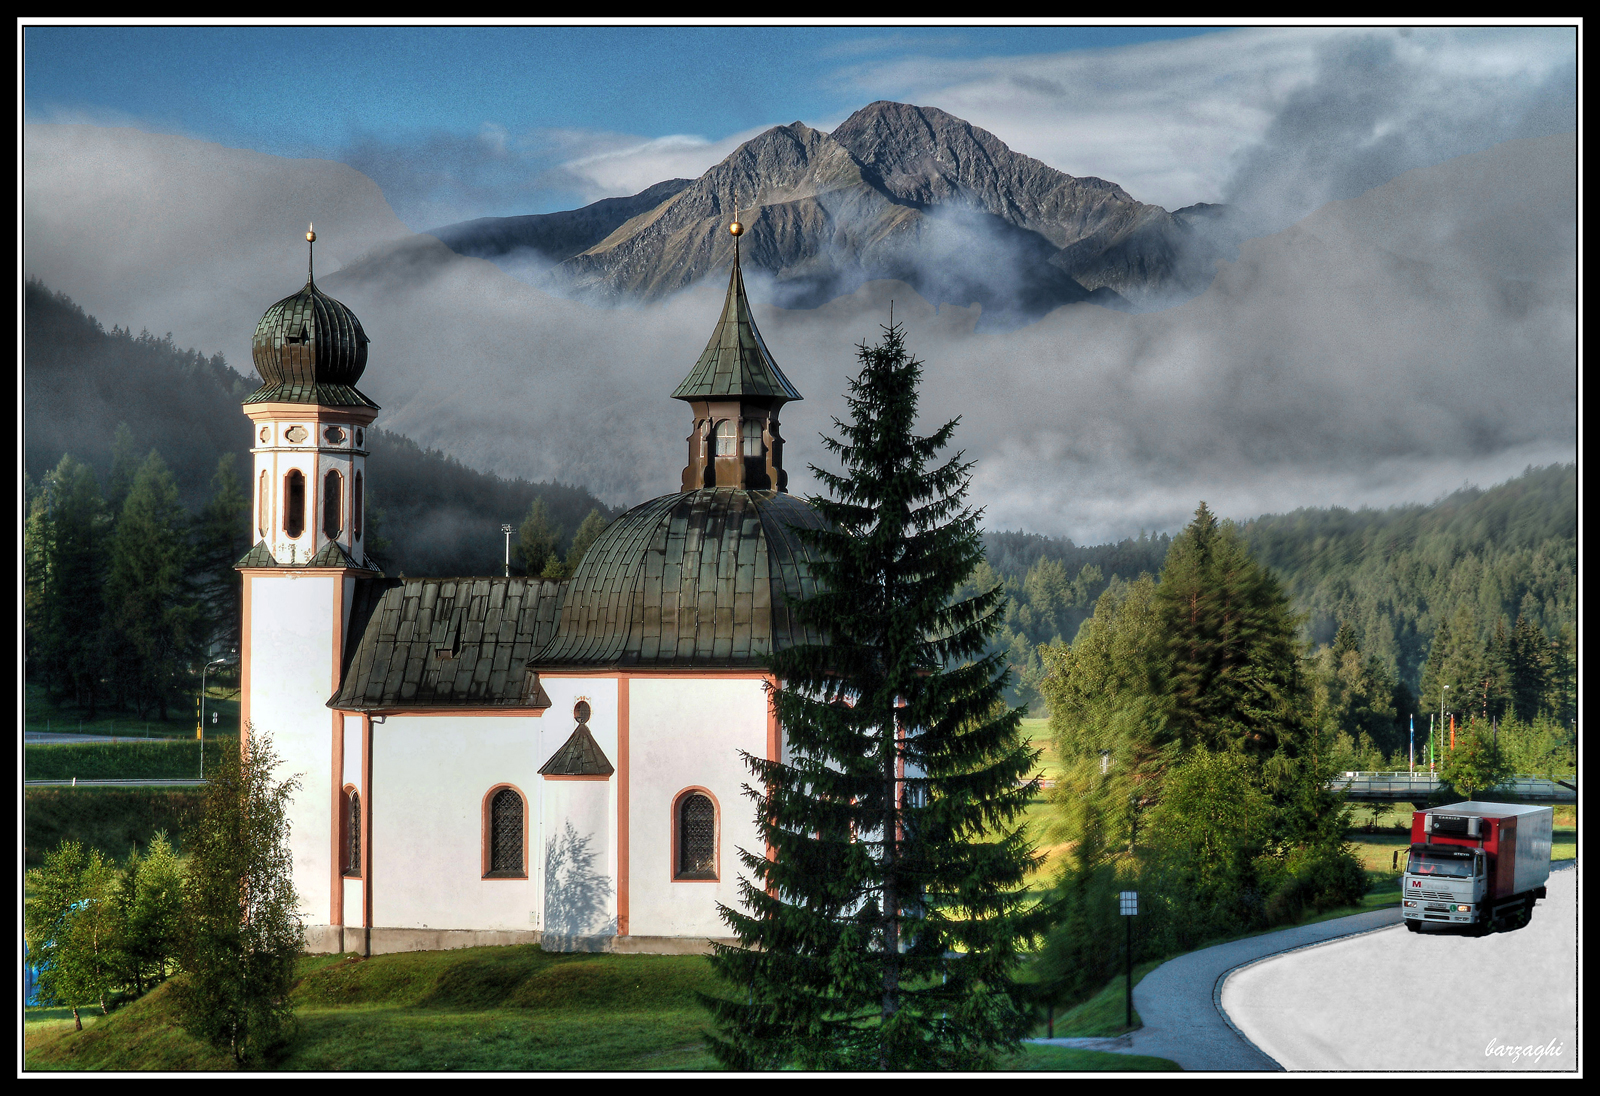 postcard from Seefeld...